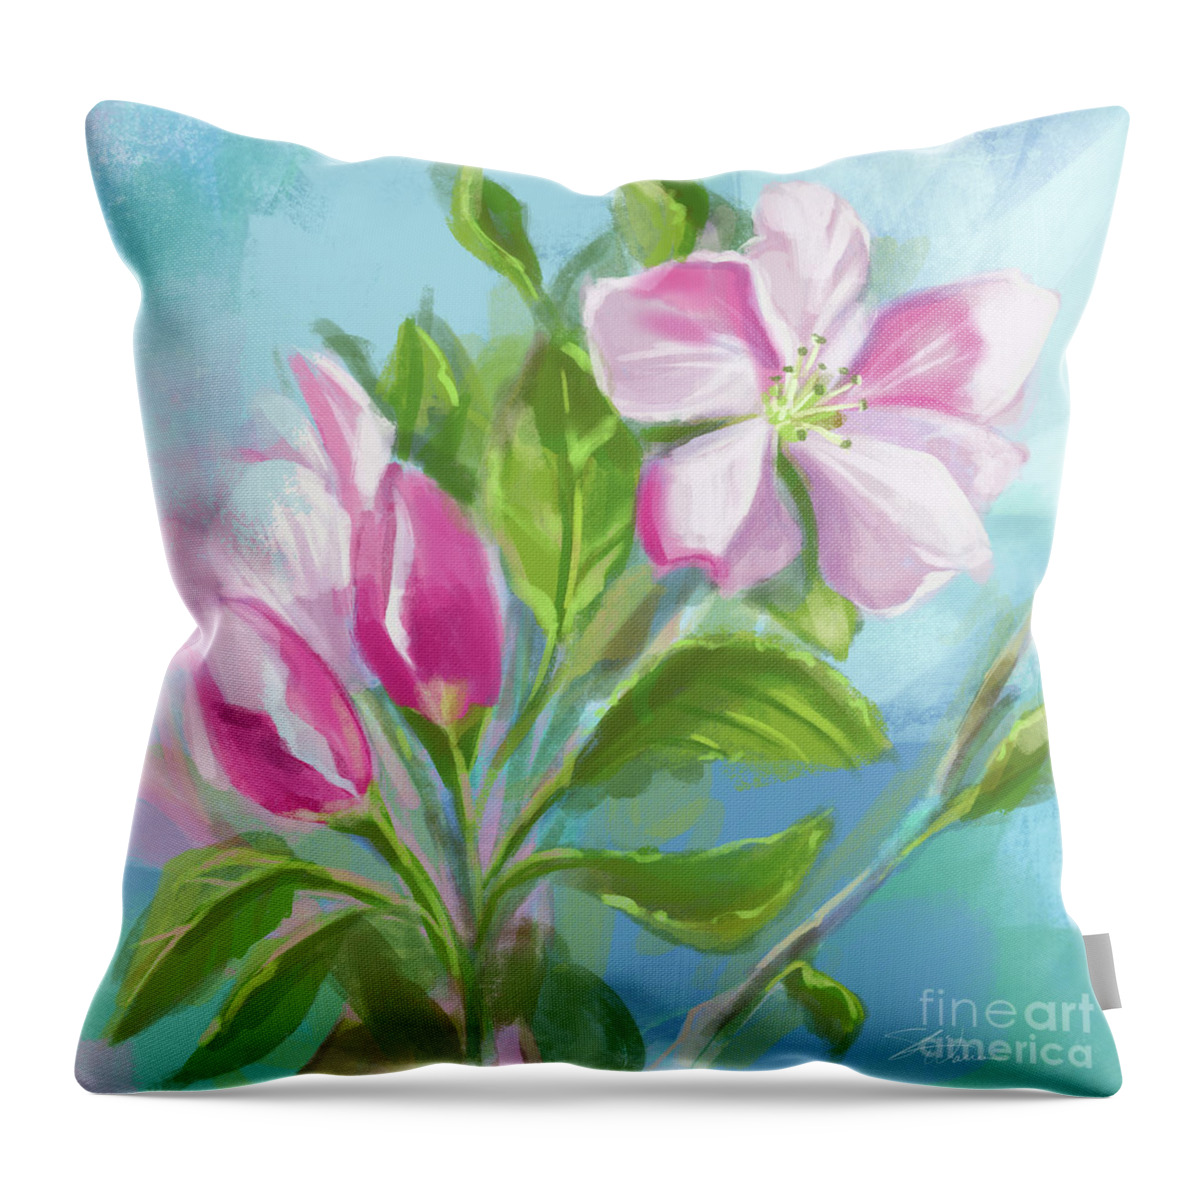 Apple Throw Pillow featuring the mixed media Springtime Apple Blossoms by Shari Warren